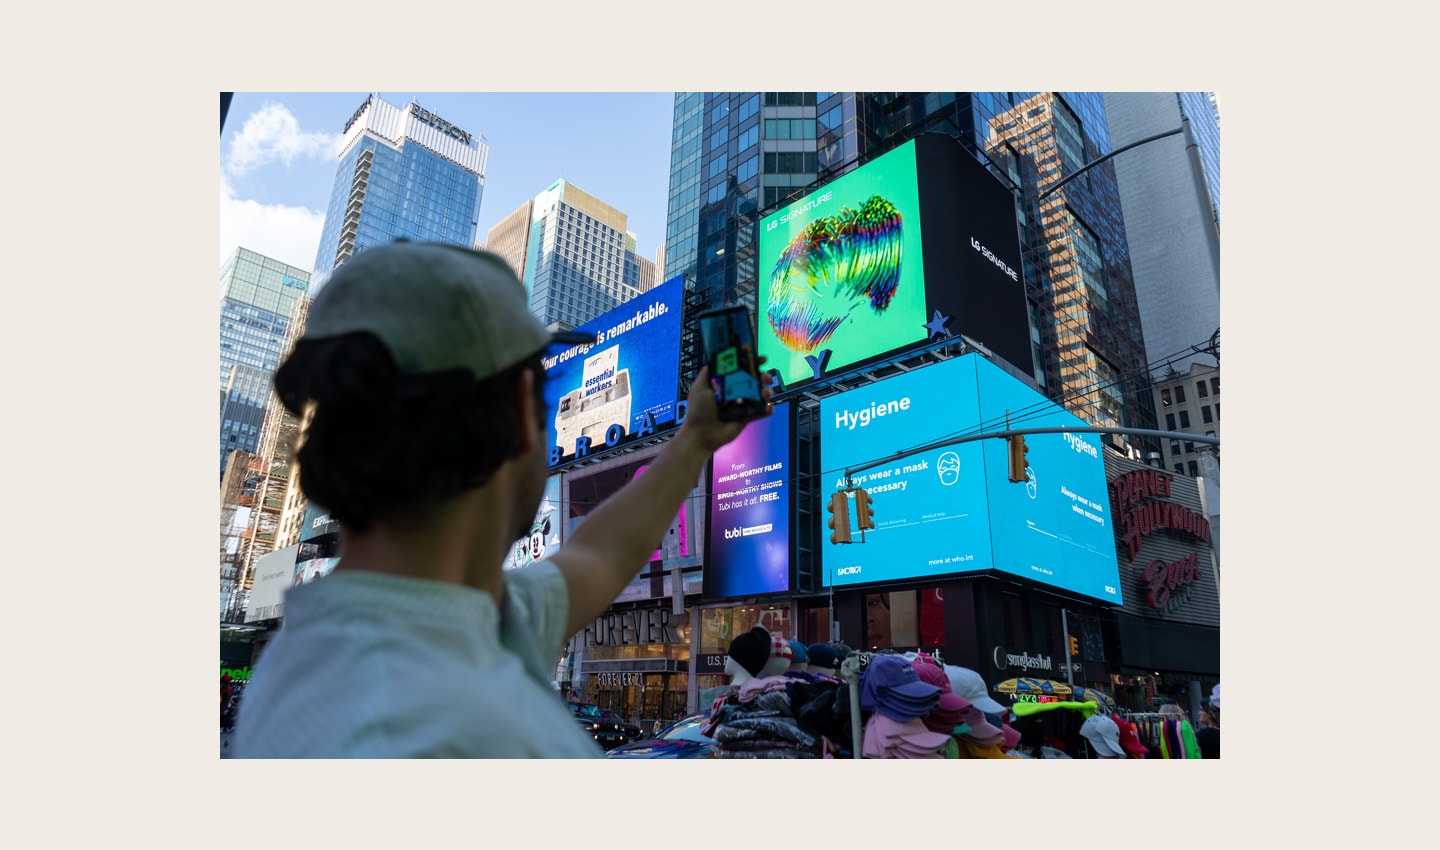 A passerby taking a picture of LG's massive, high-definition digital billboard in Time Square, New York displaying the artwork of David McLeod